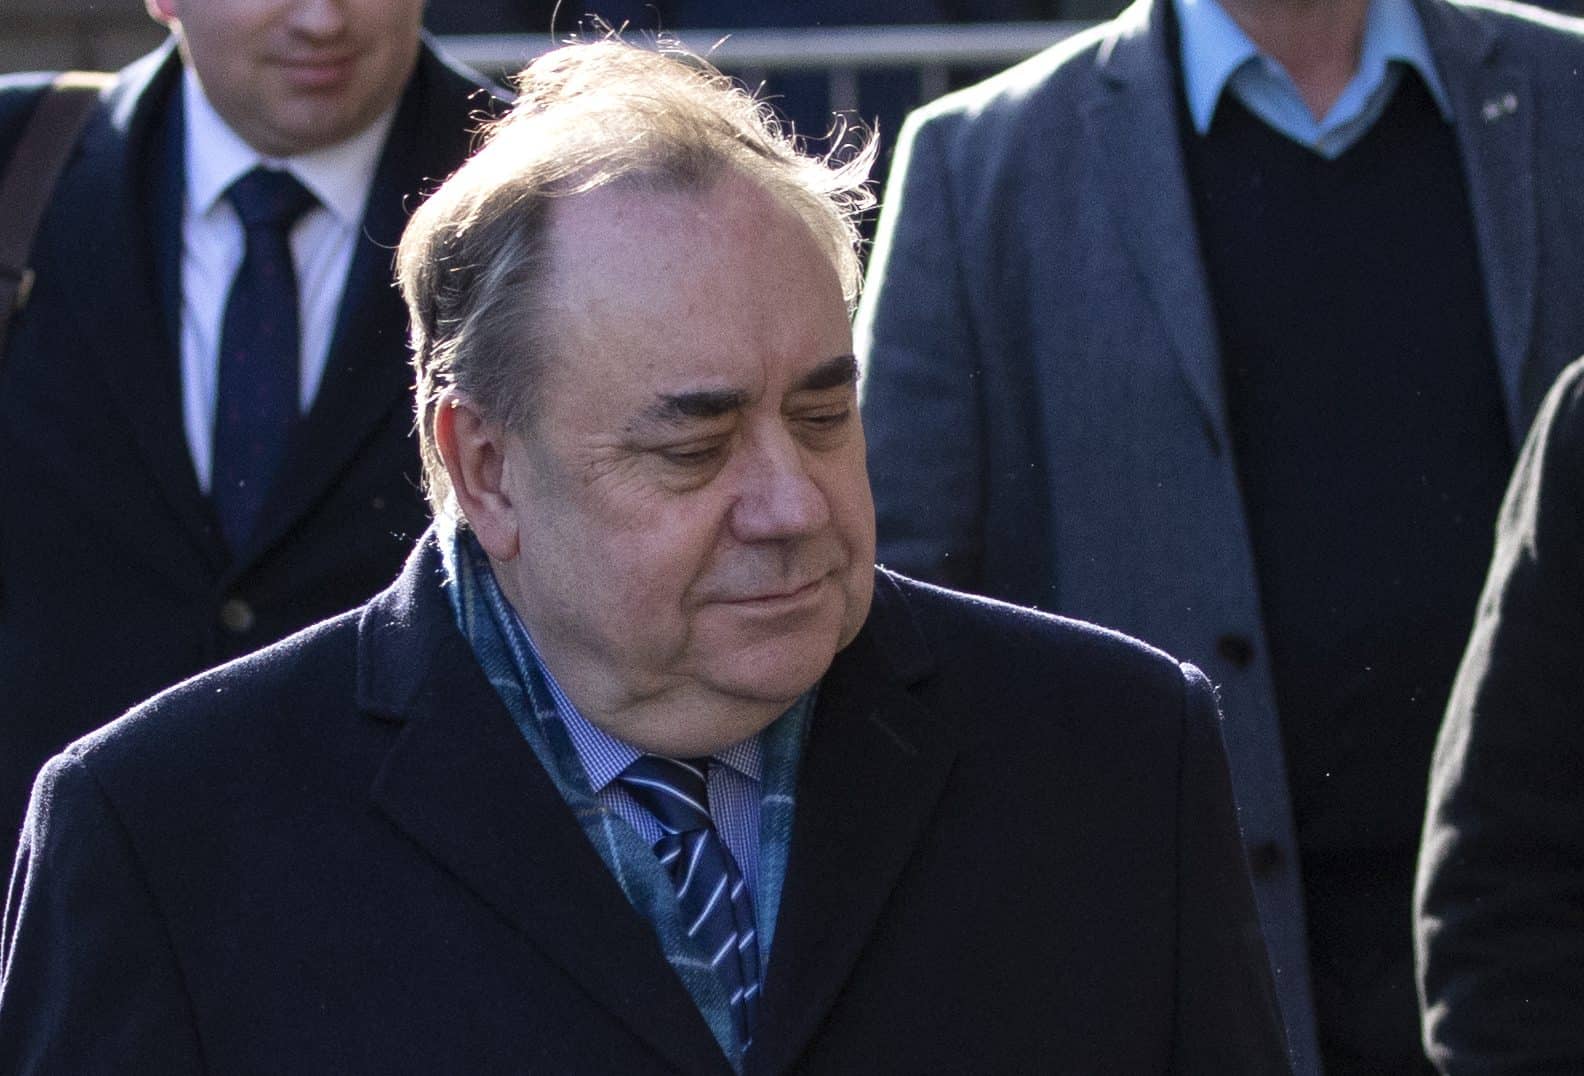 Alex Salmond acquitted of attempted rape and sexual assaults